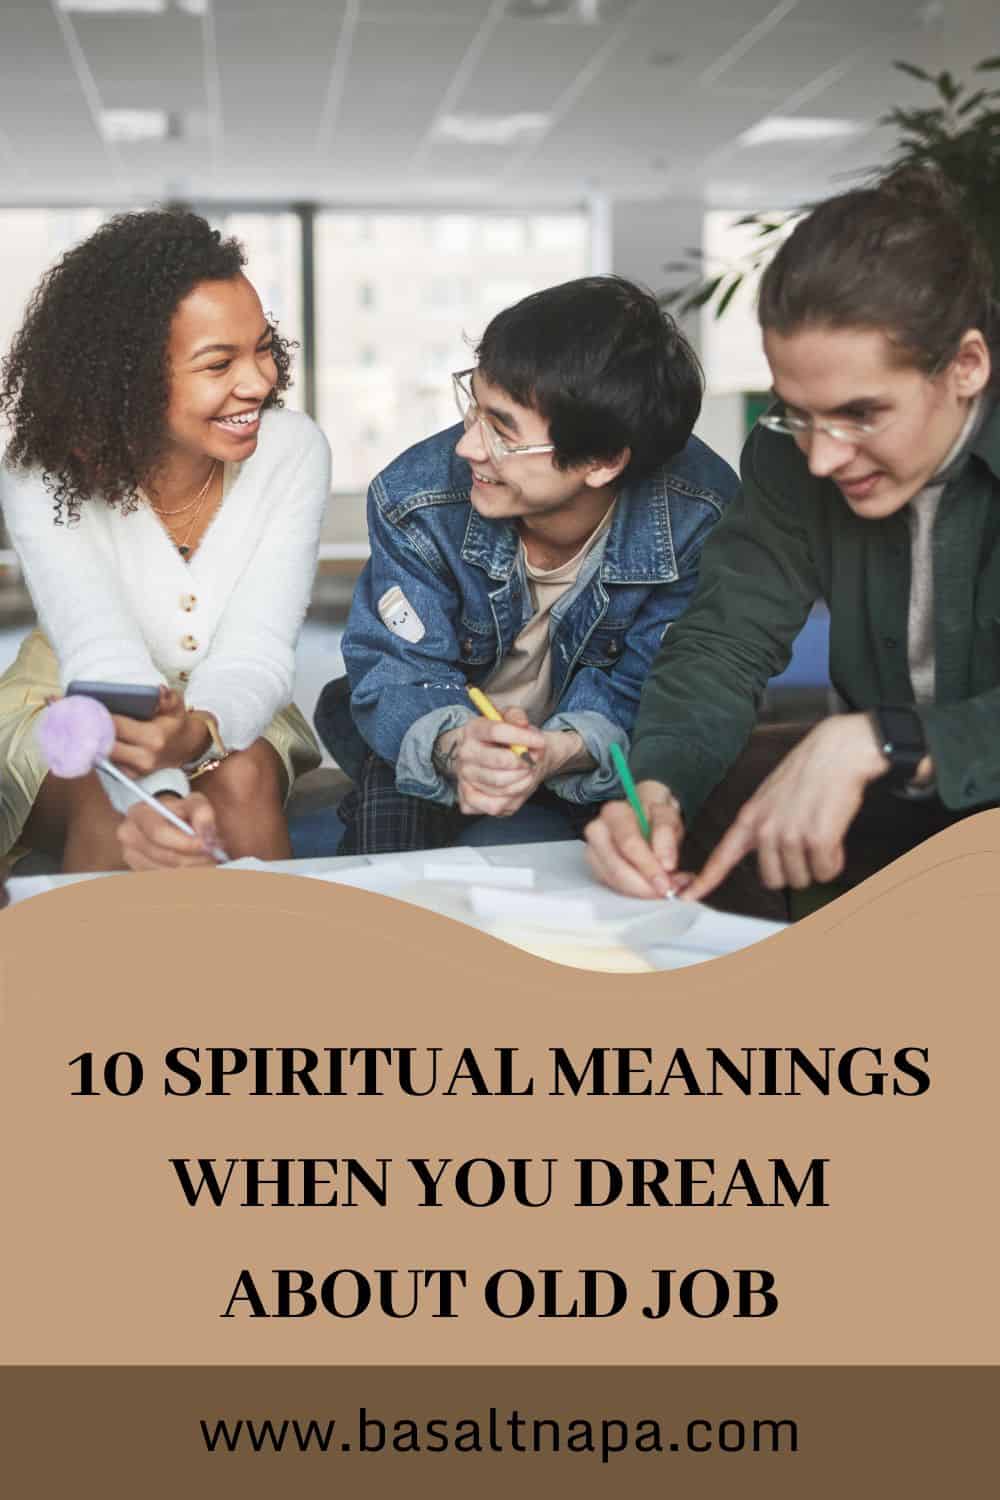 10 Spiritual Meanings When You Dream About Old Job